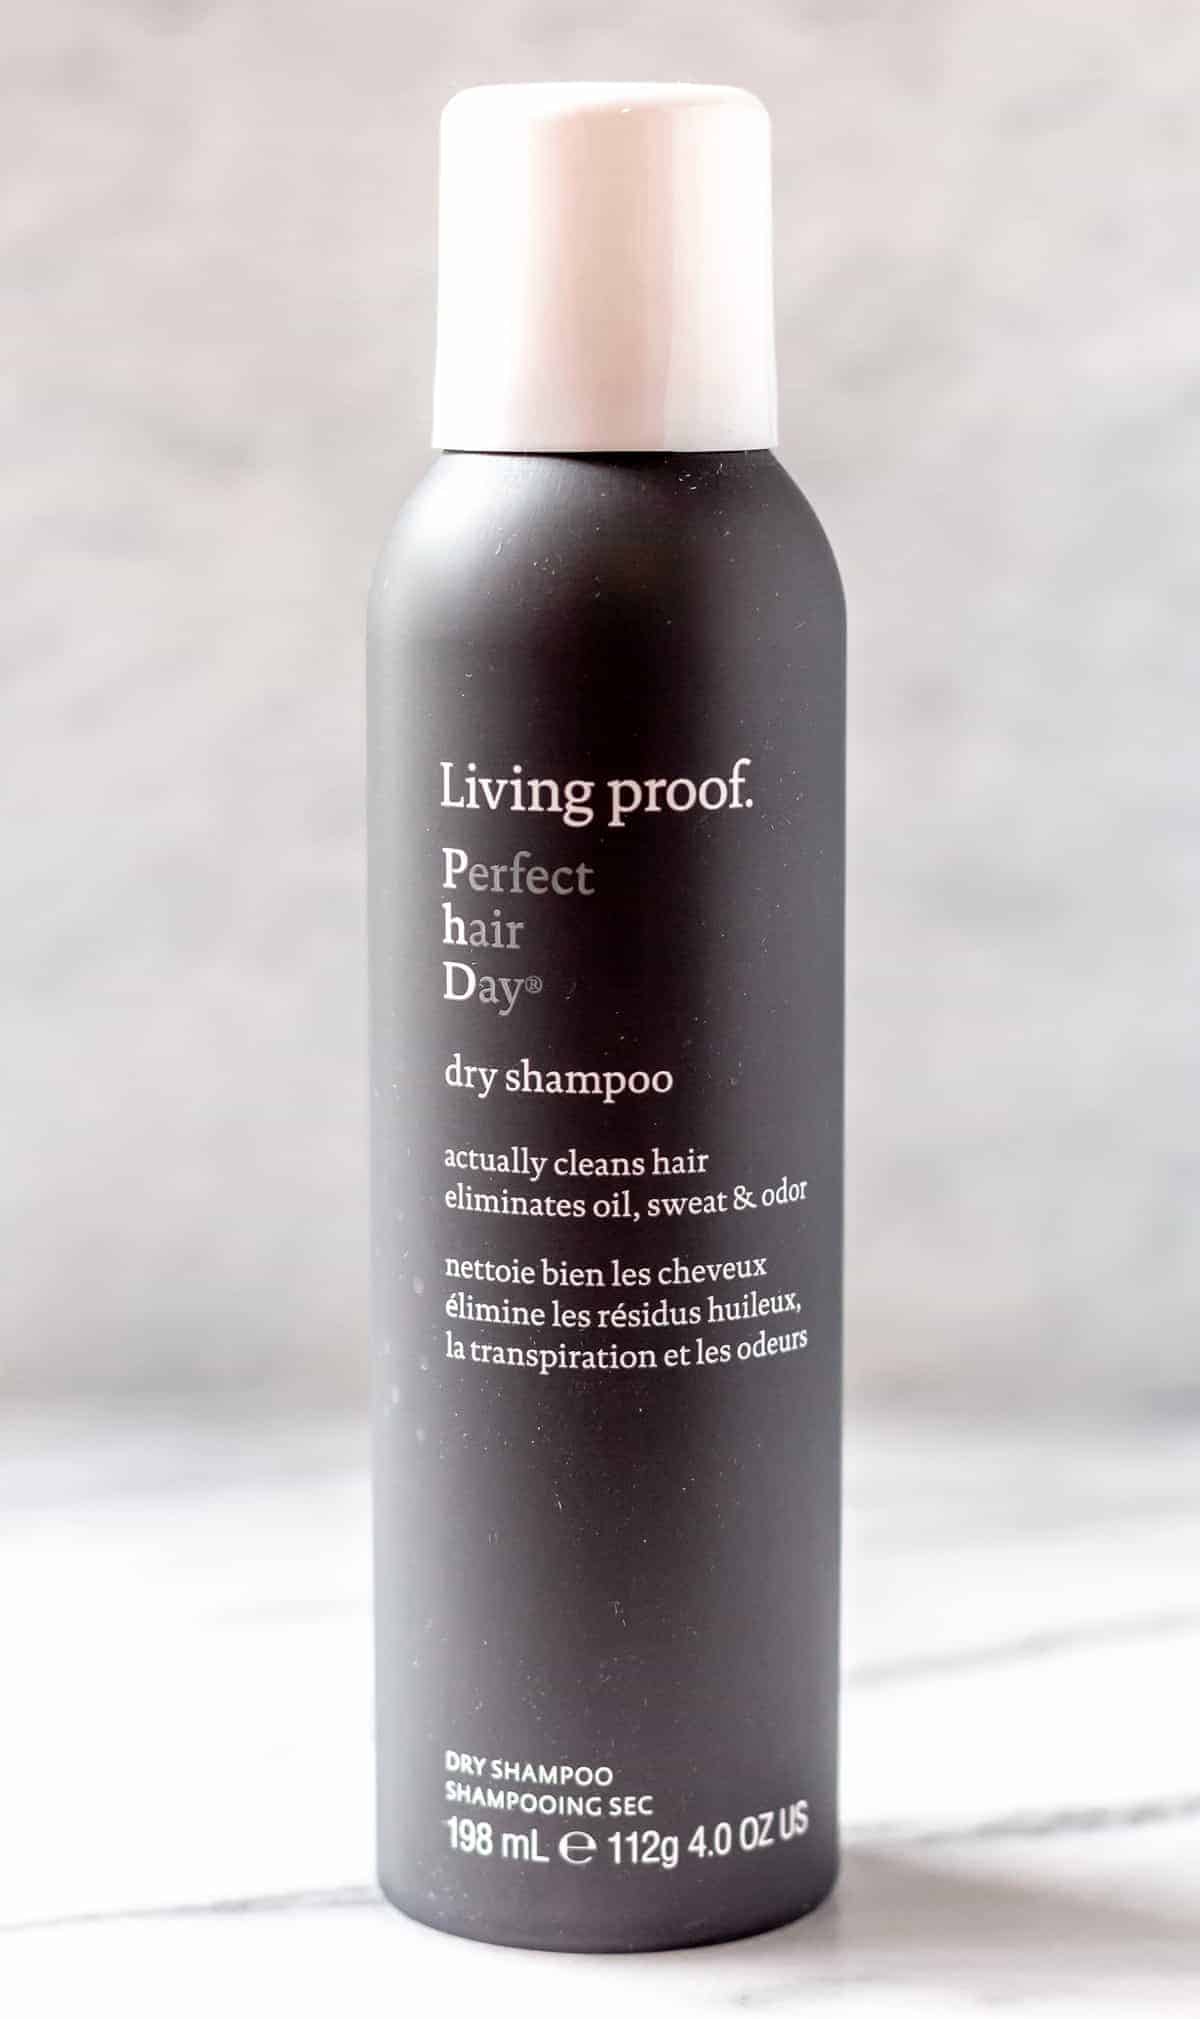 Living Proof Perfect Hair Day Dry Shampoo over a gray background